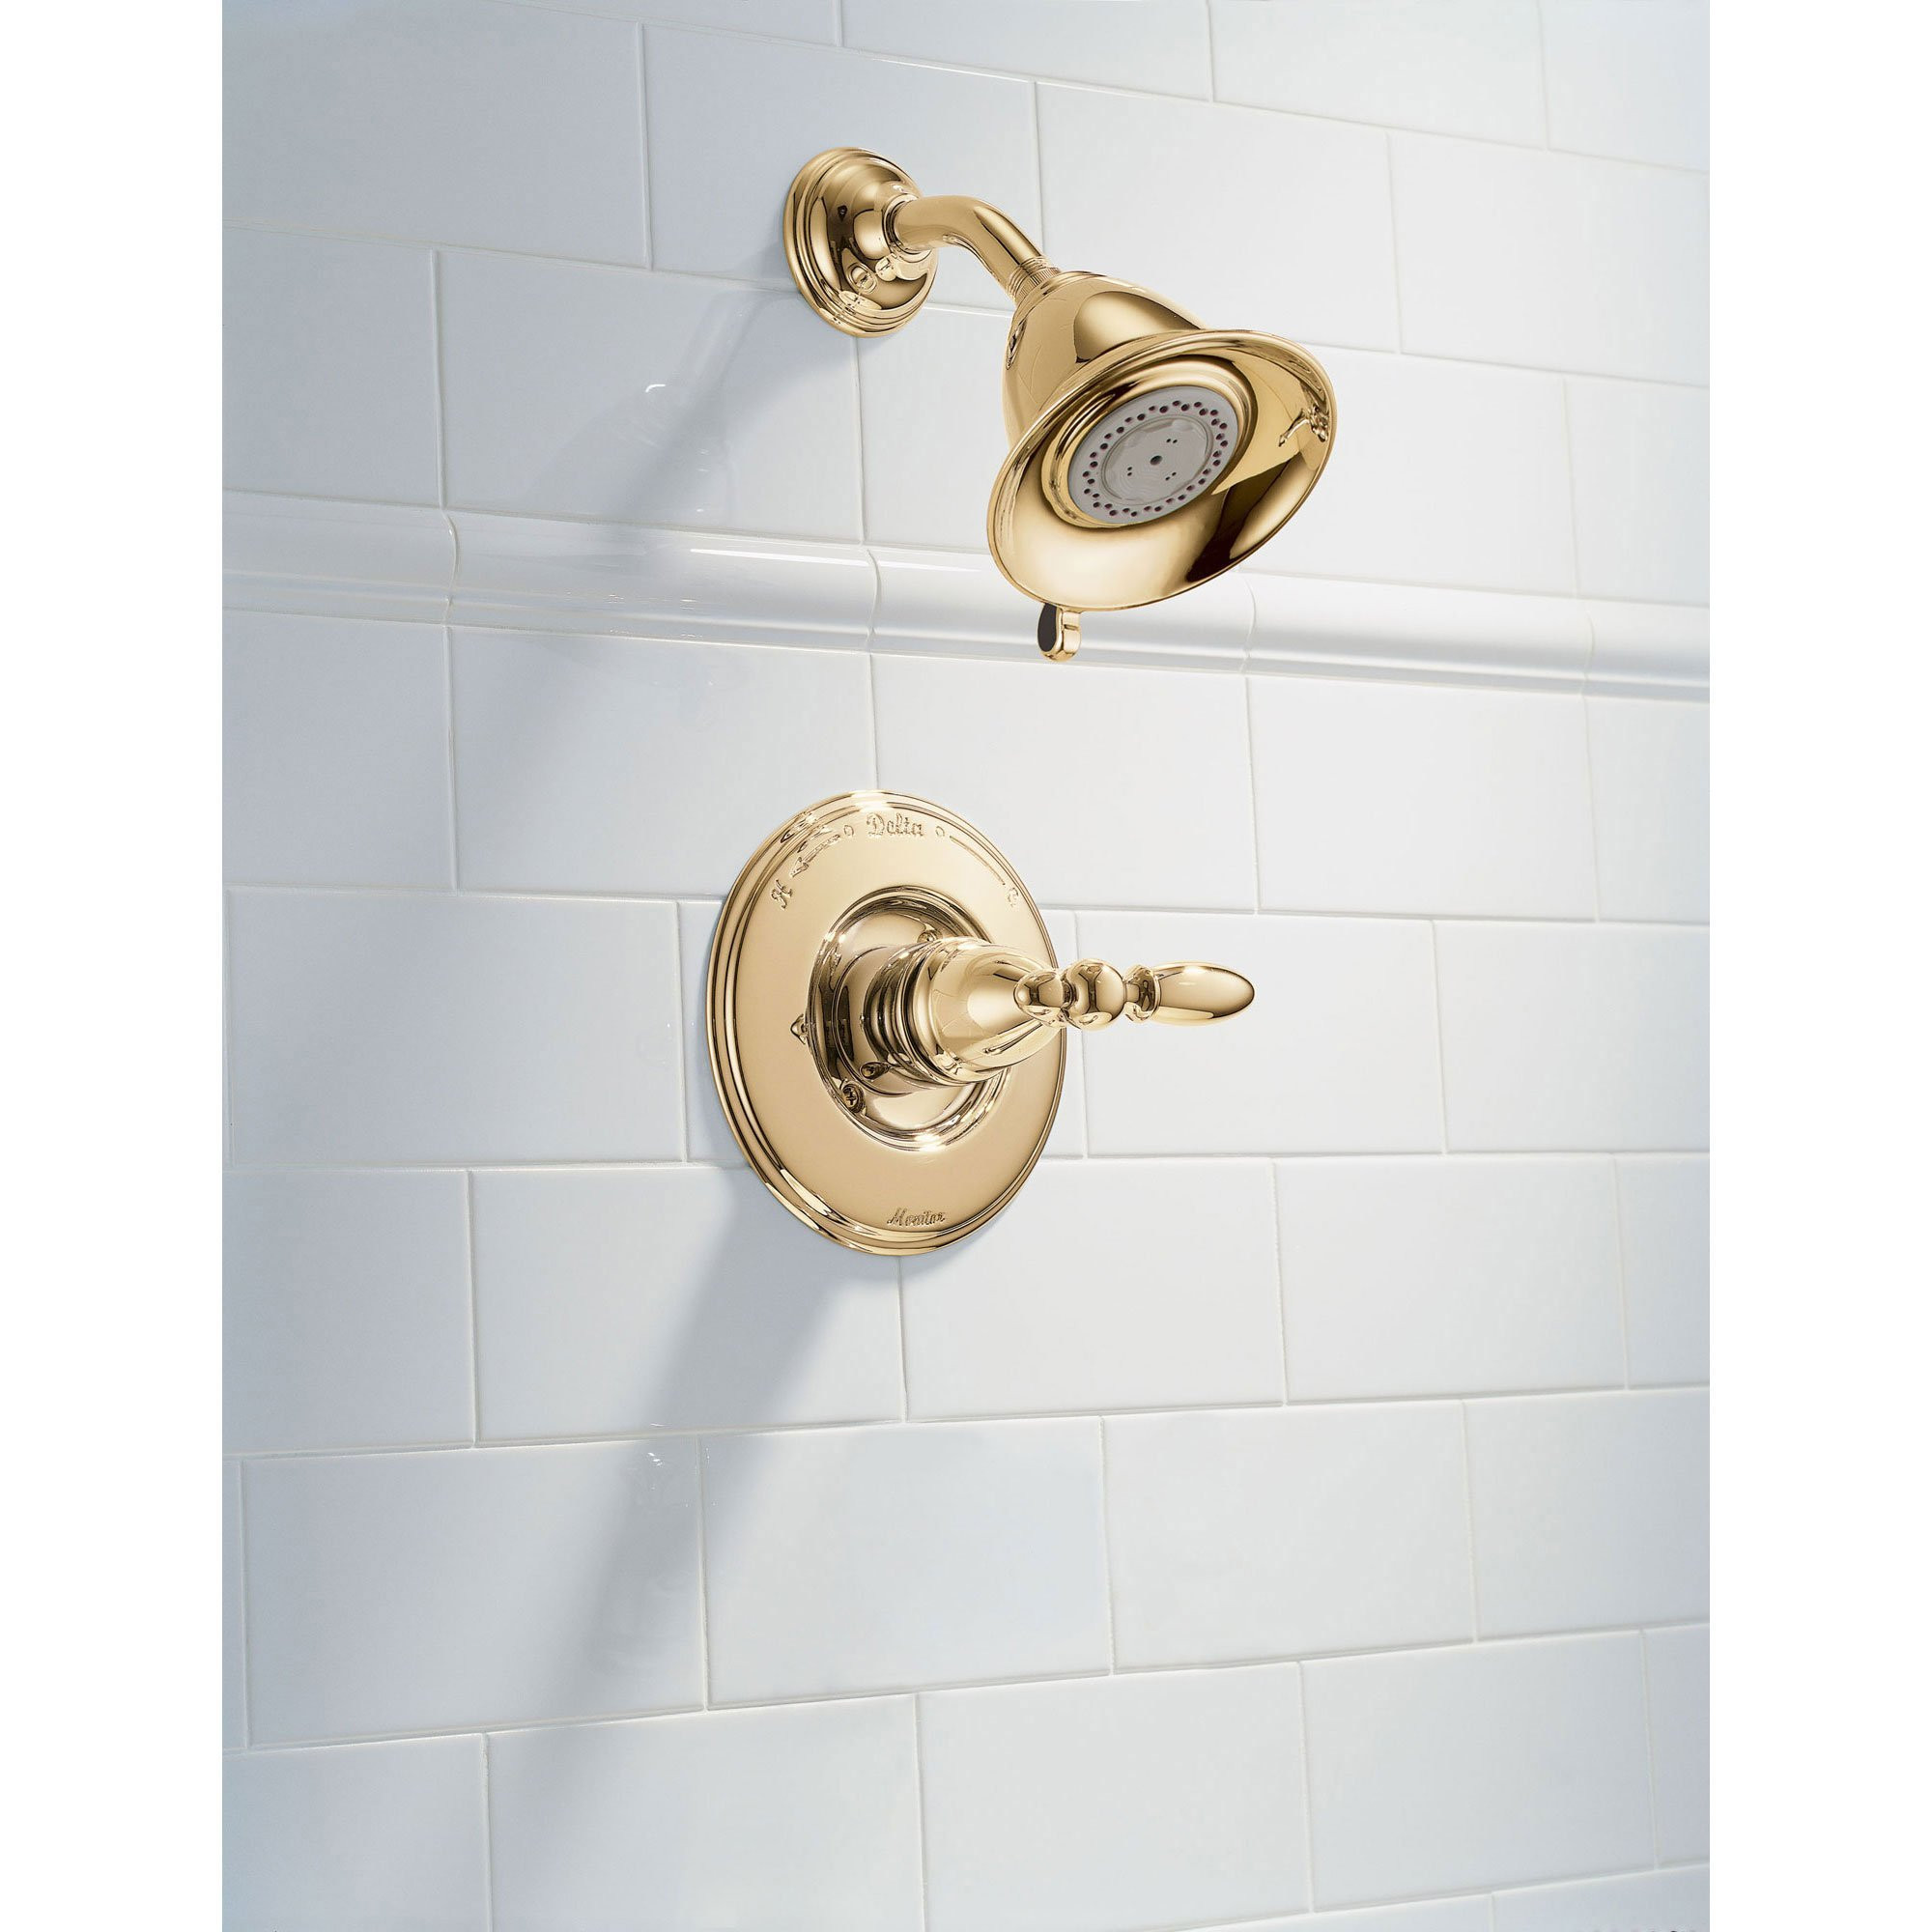 Delta Polished Brass Bathroom Faucets
 Delta Victorian Collection Polished Brass Finish